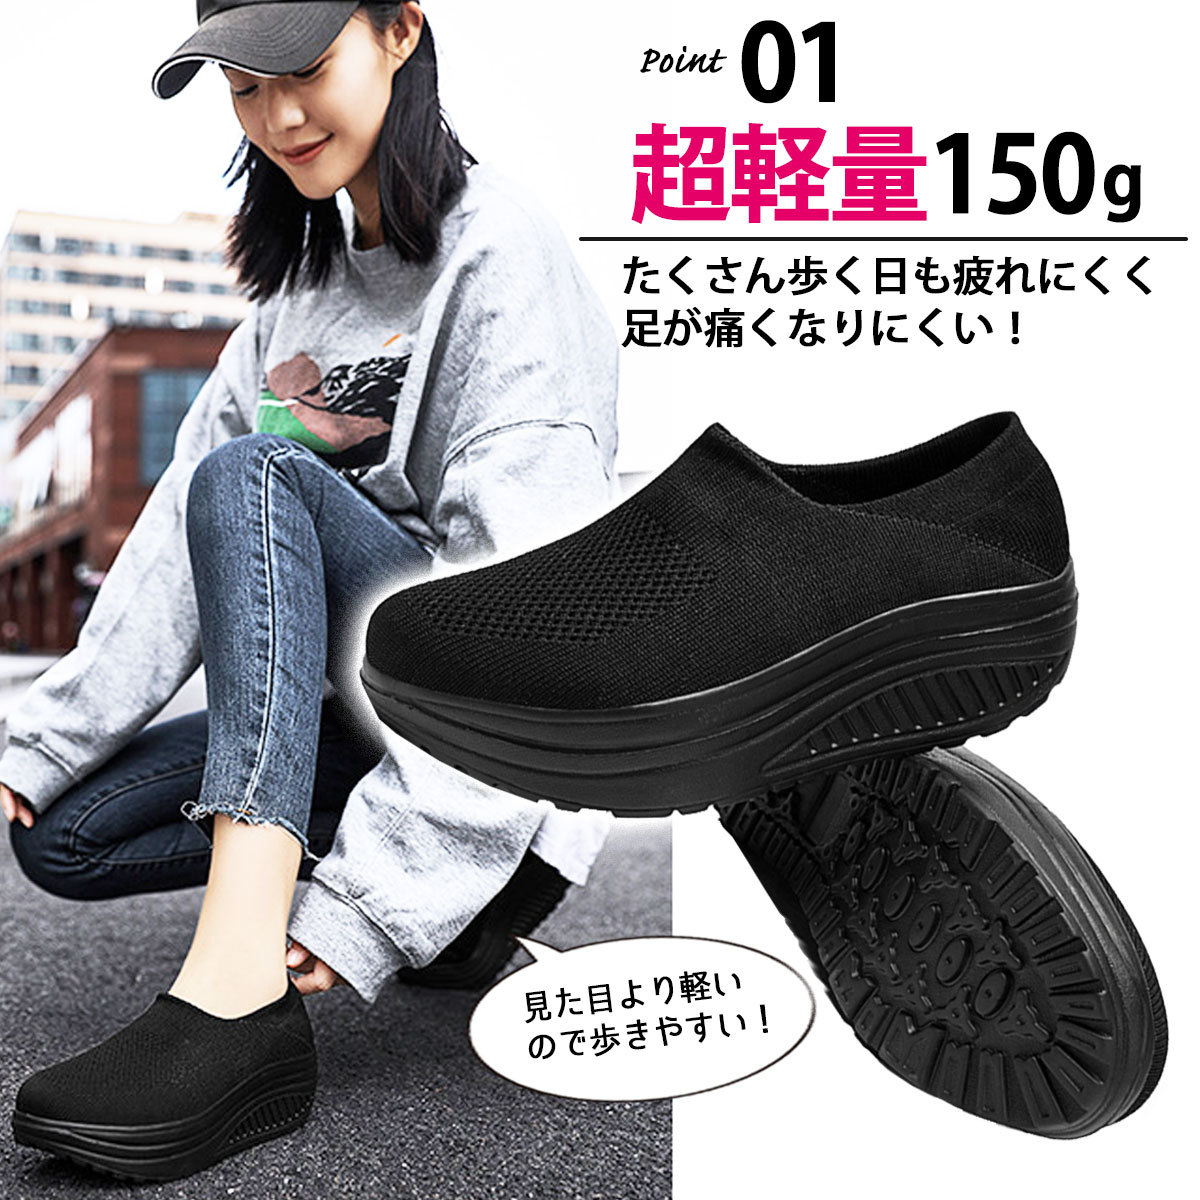  thickness bottom sneakers lady's shoes slip-on shoes light weight Korea sport running walking 